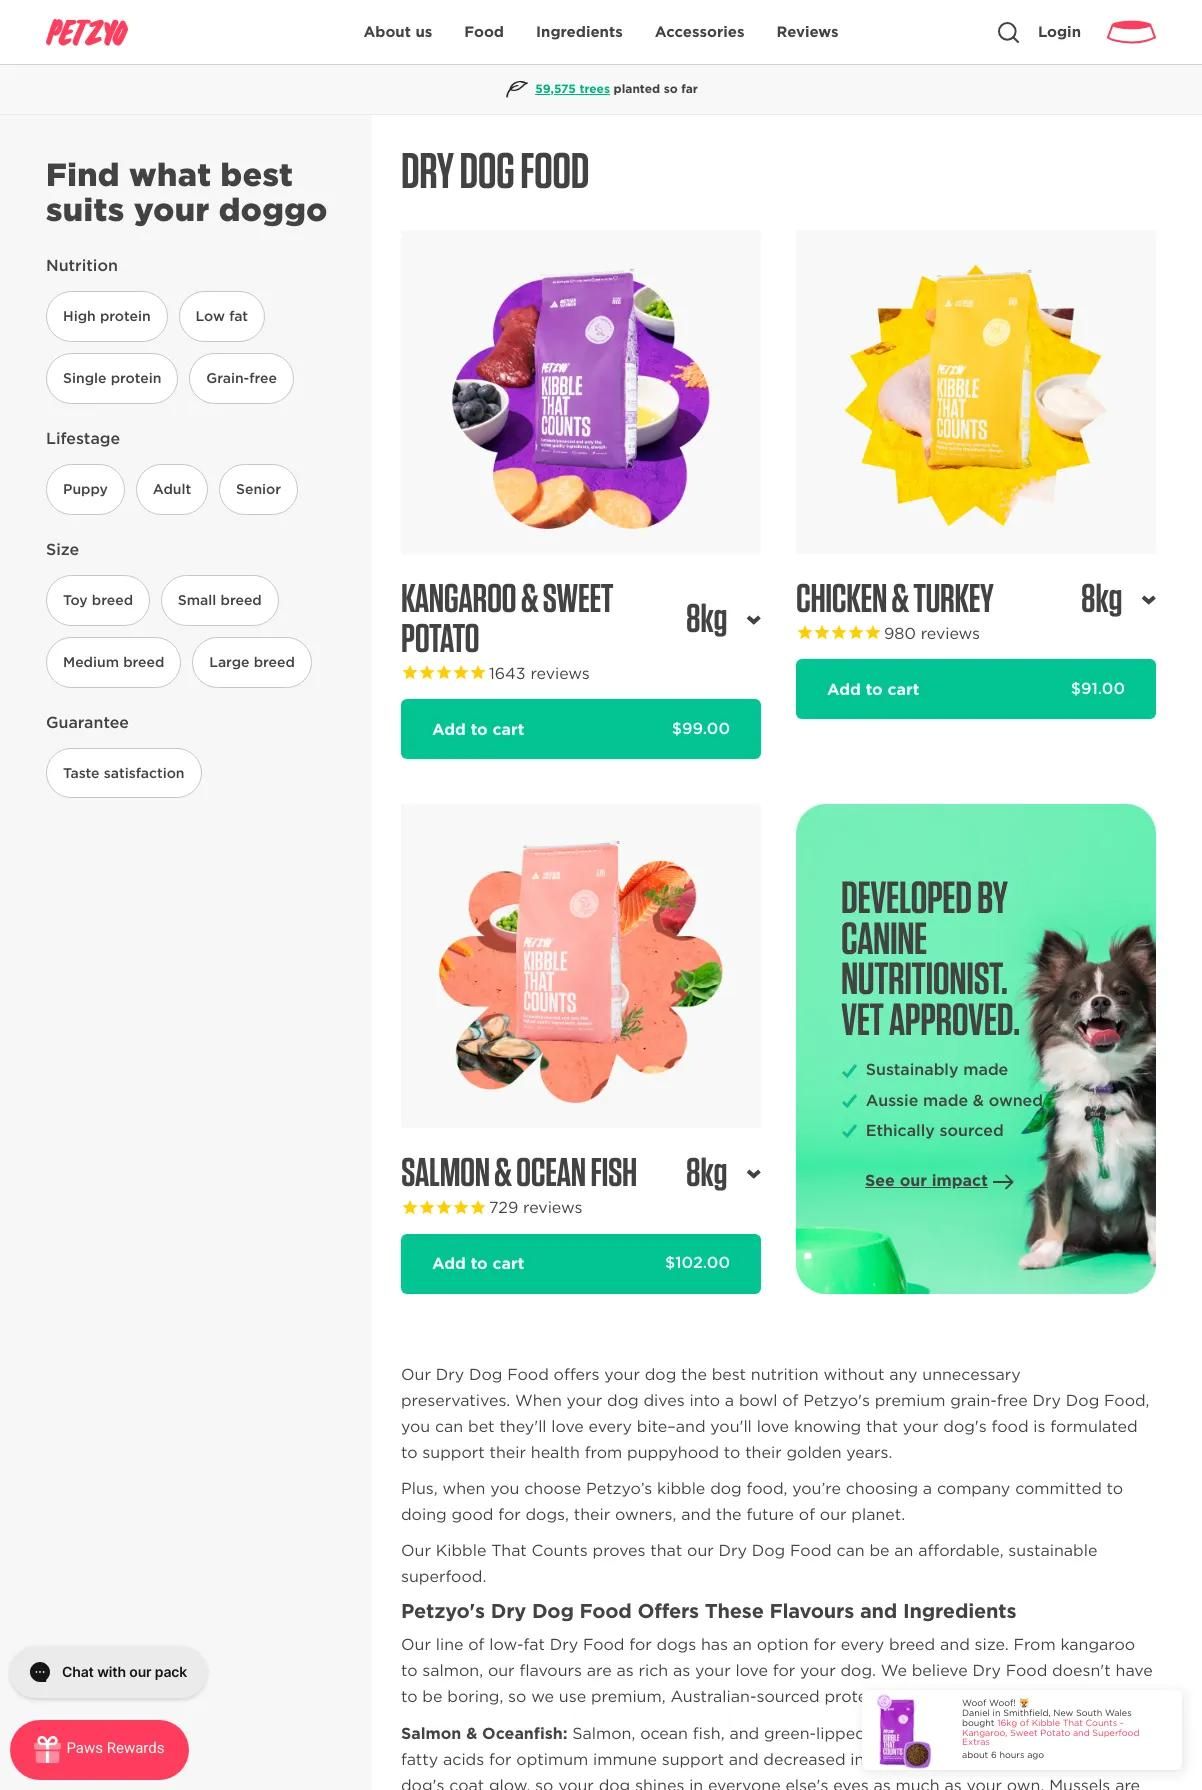 Screenshot 2 of Petzyo (Example Shopify Food and Beverage Website)